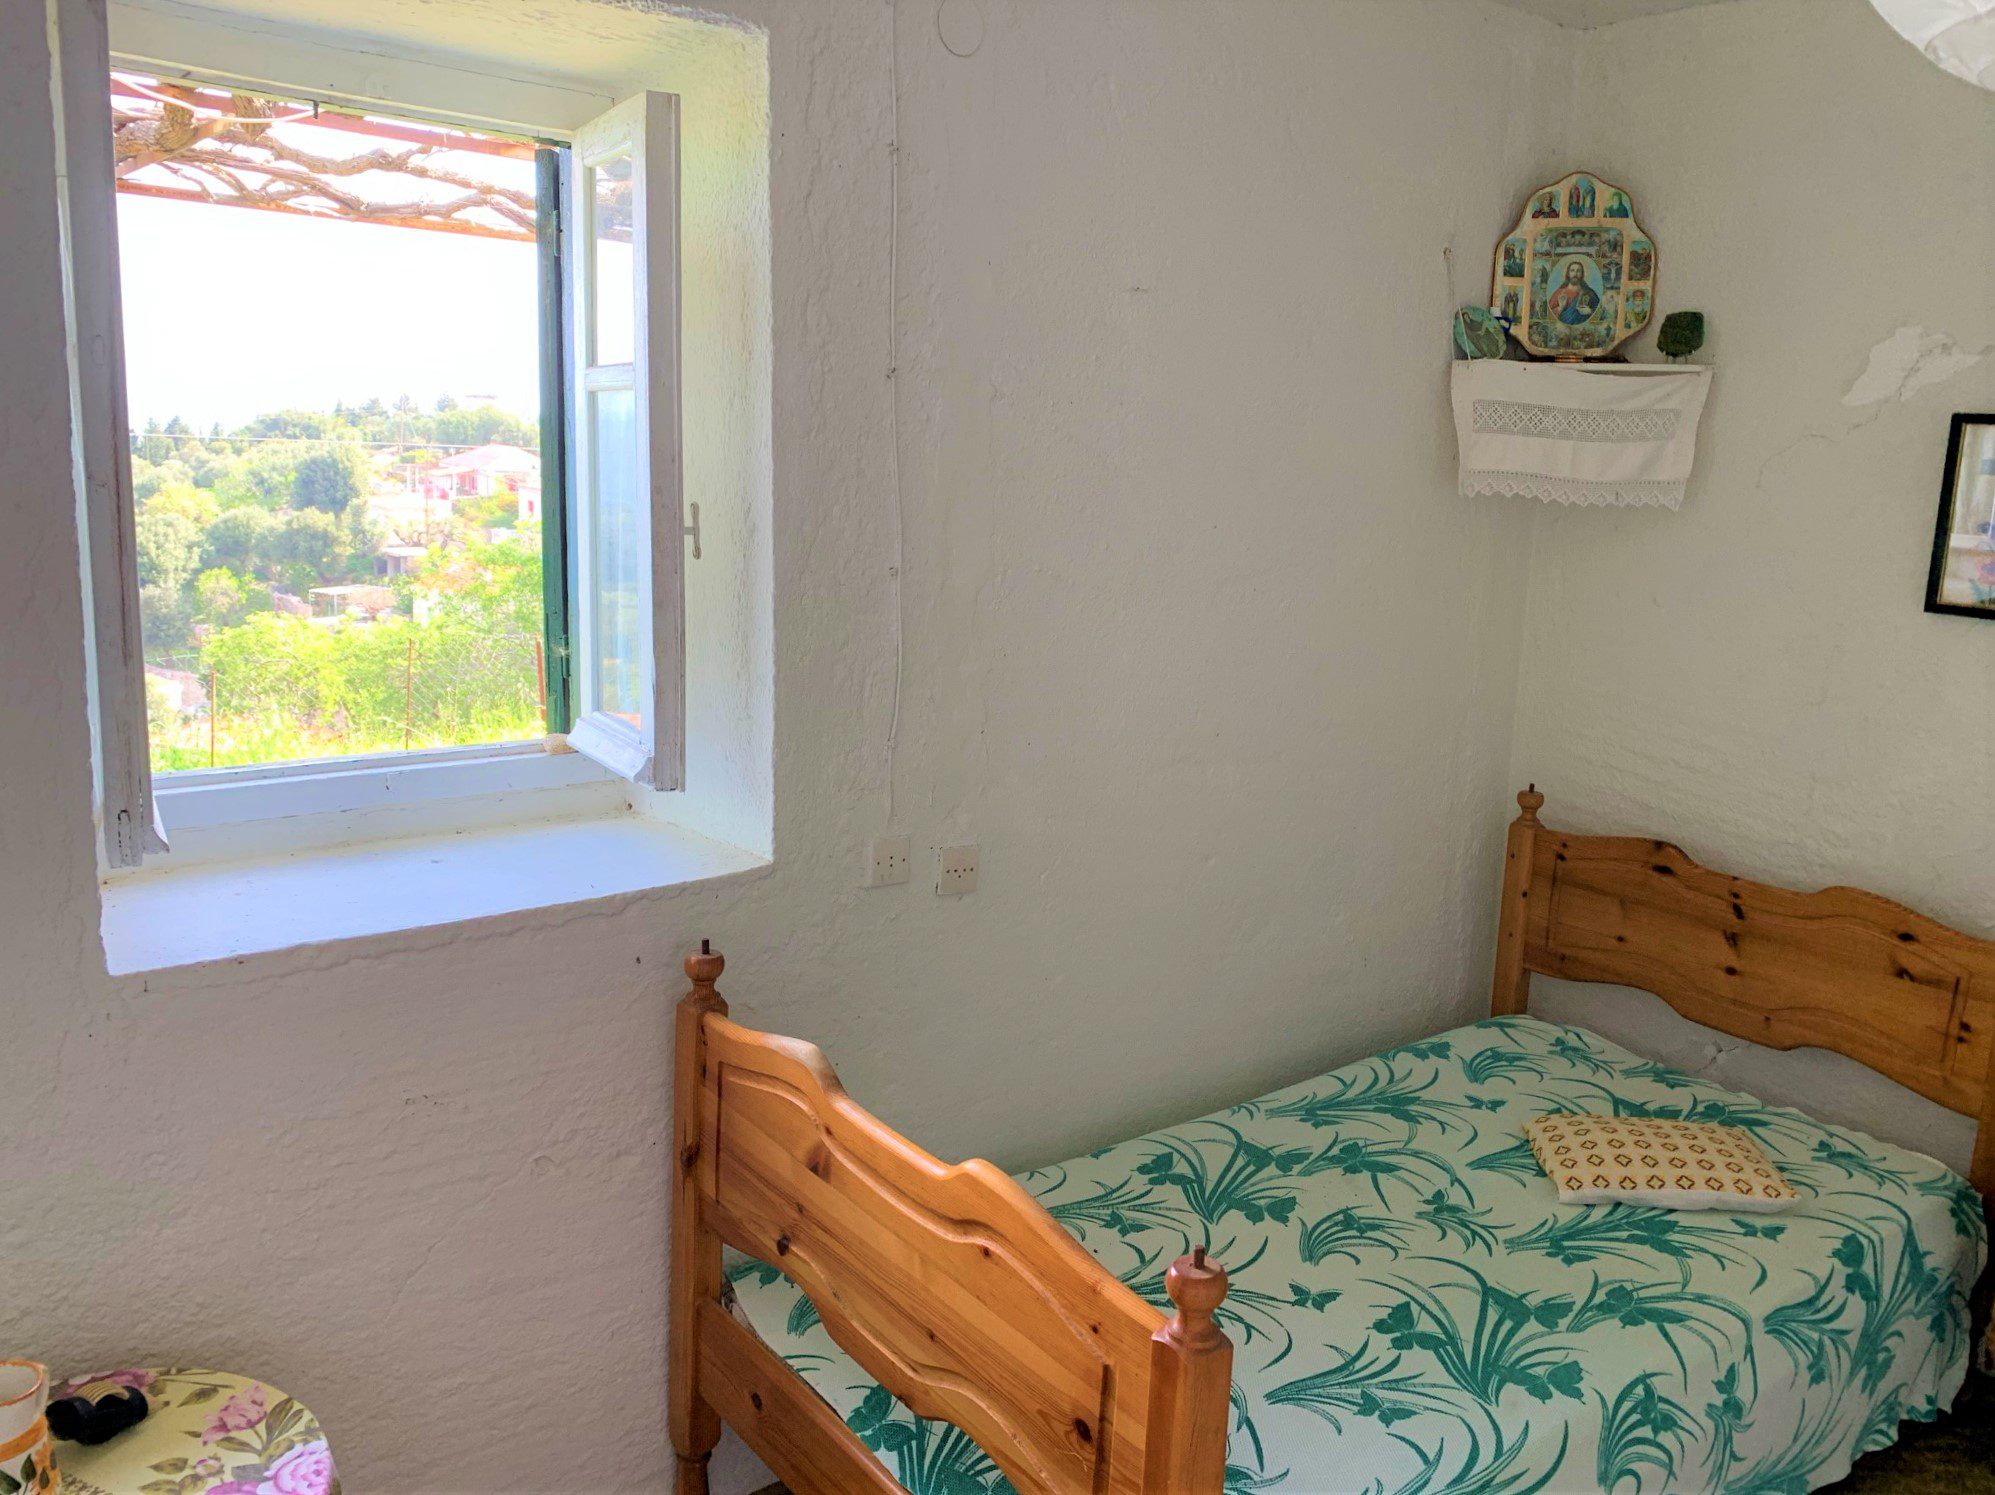 Bedroom of house for sale in ithaca Greece, Rachi